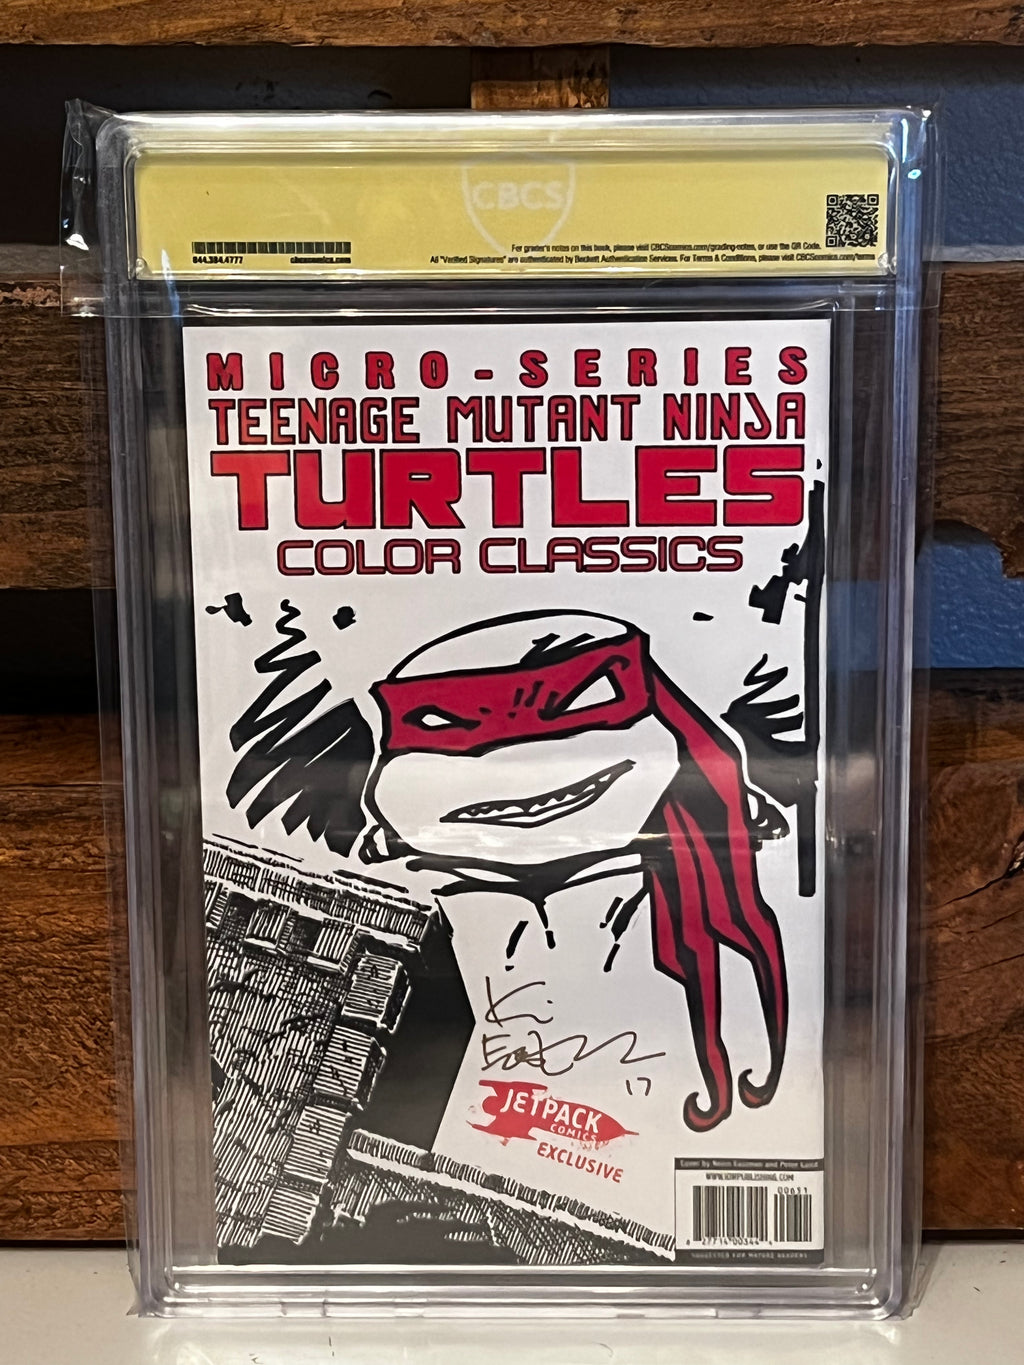 IDW TMNT Color Classics #6 RE Jetpack Comics Exclusive 9.8 Signed And Sketched By Kevin Eastman